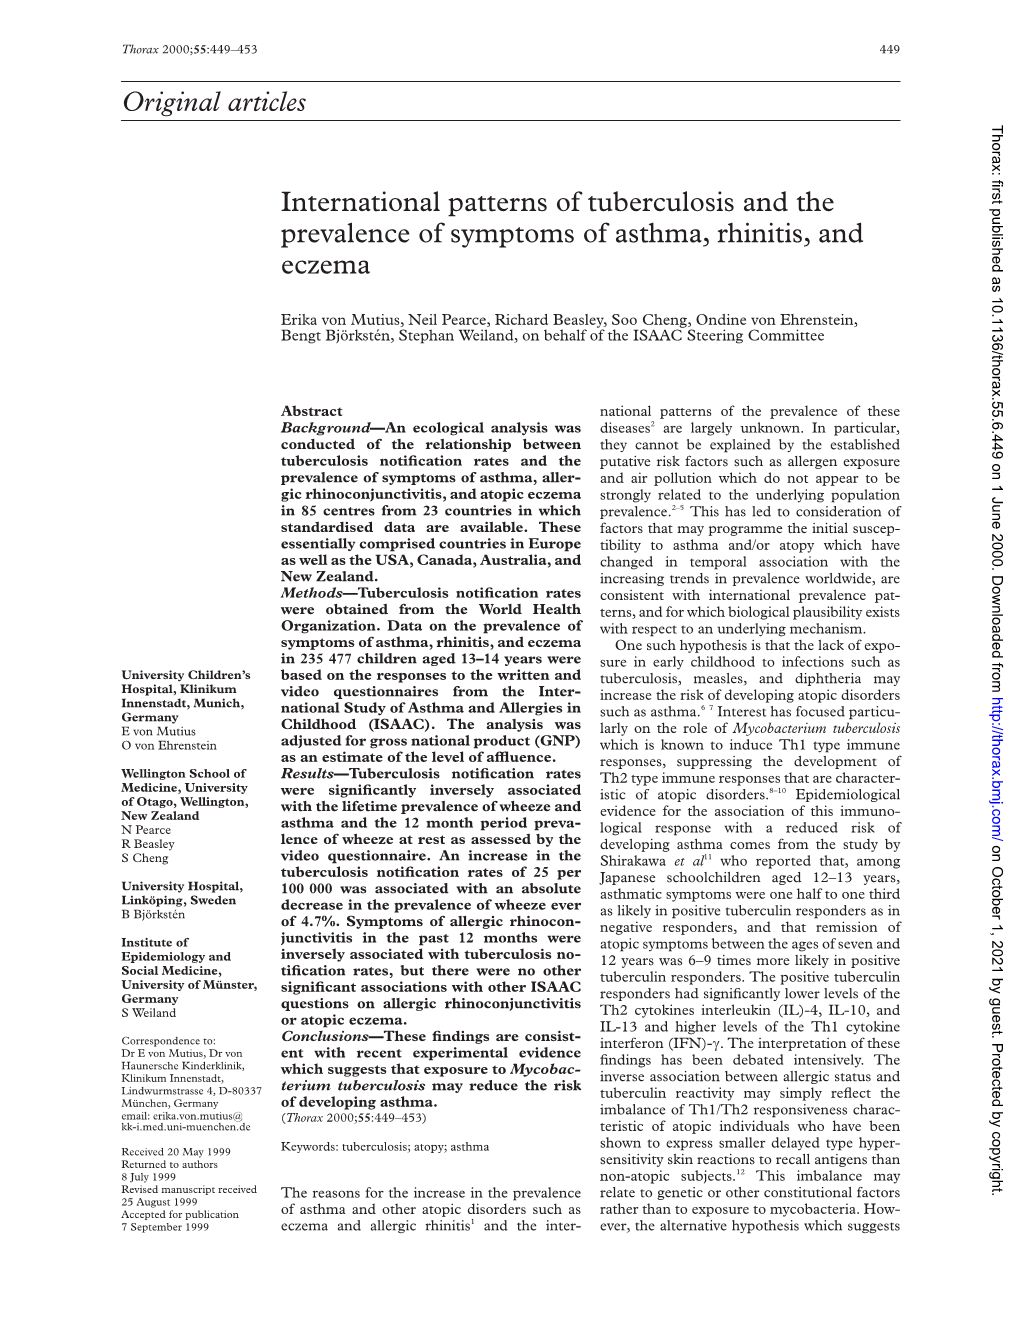 Original Articles International Patterns of Tuberculosis and the Prevalence of Symptoms of Asthma, Rhinitis, and Eczema